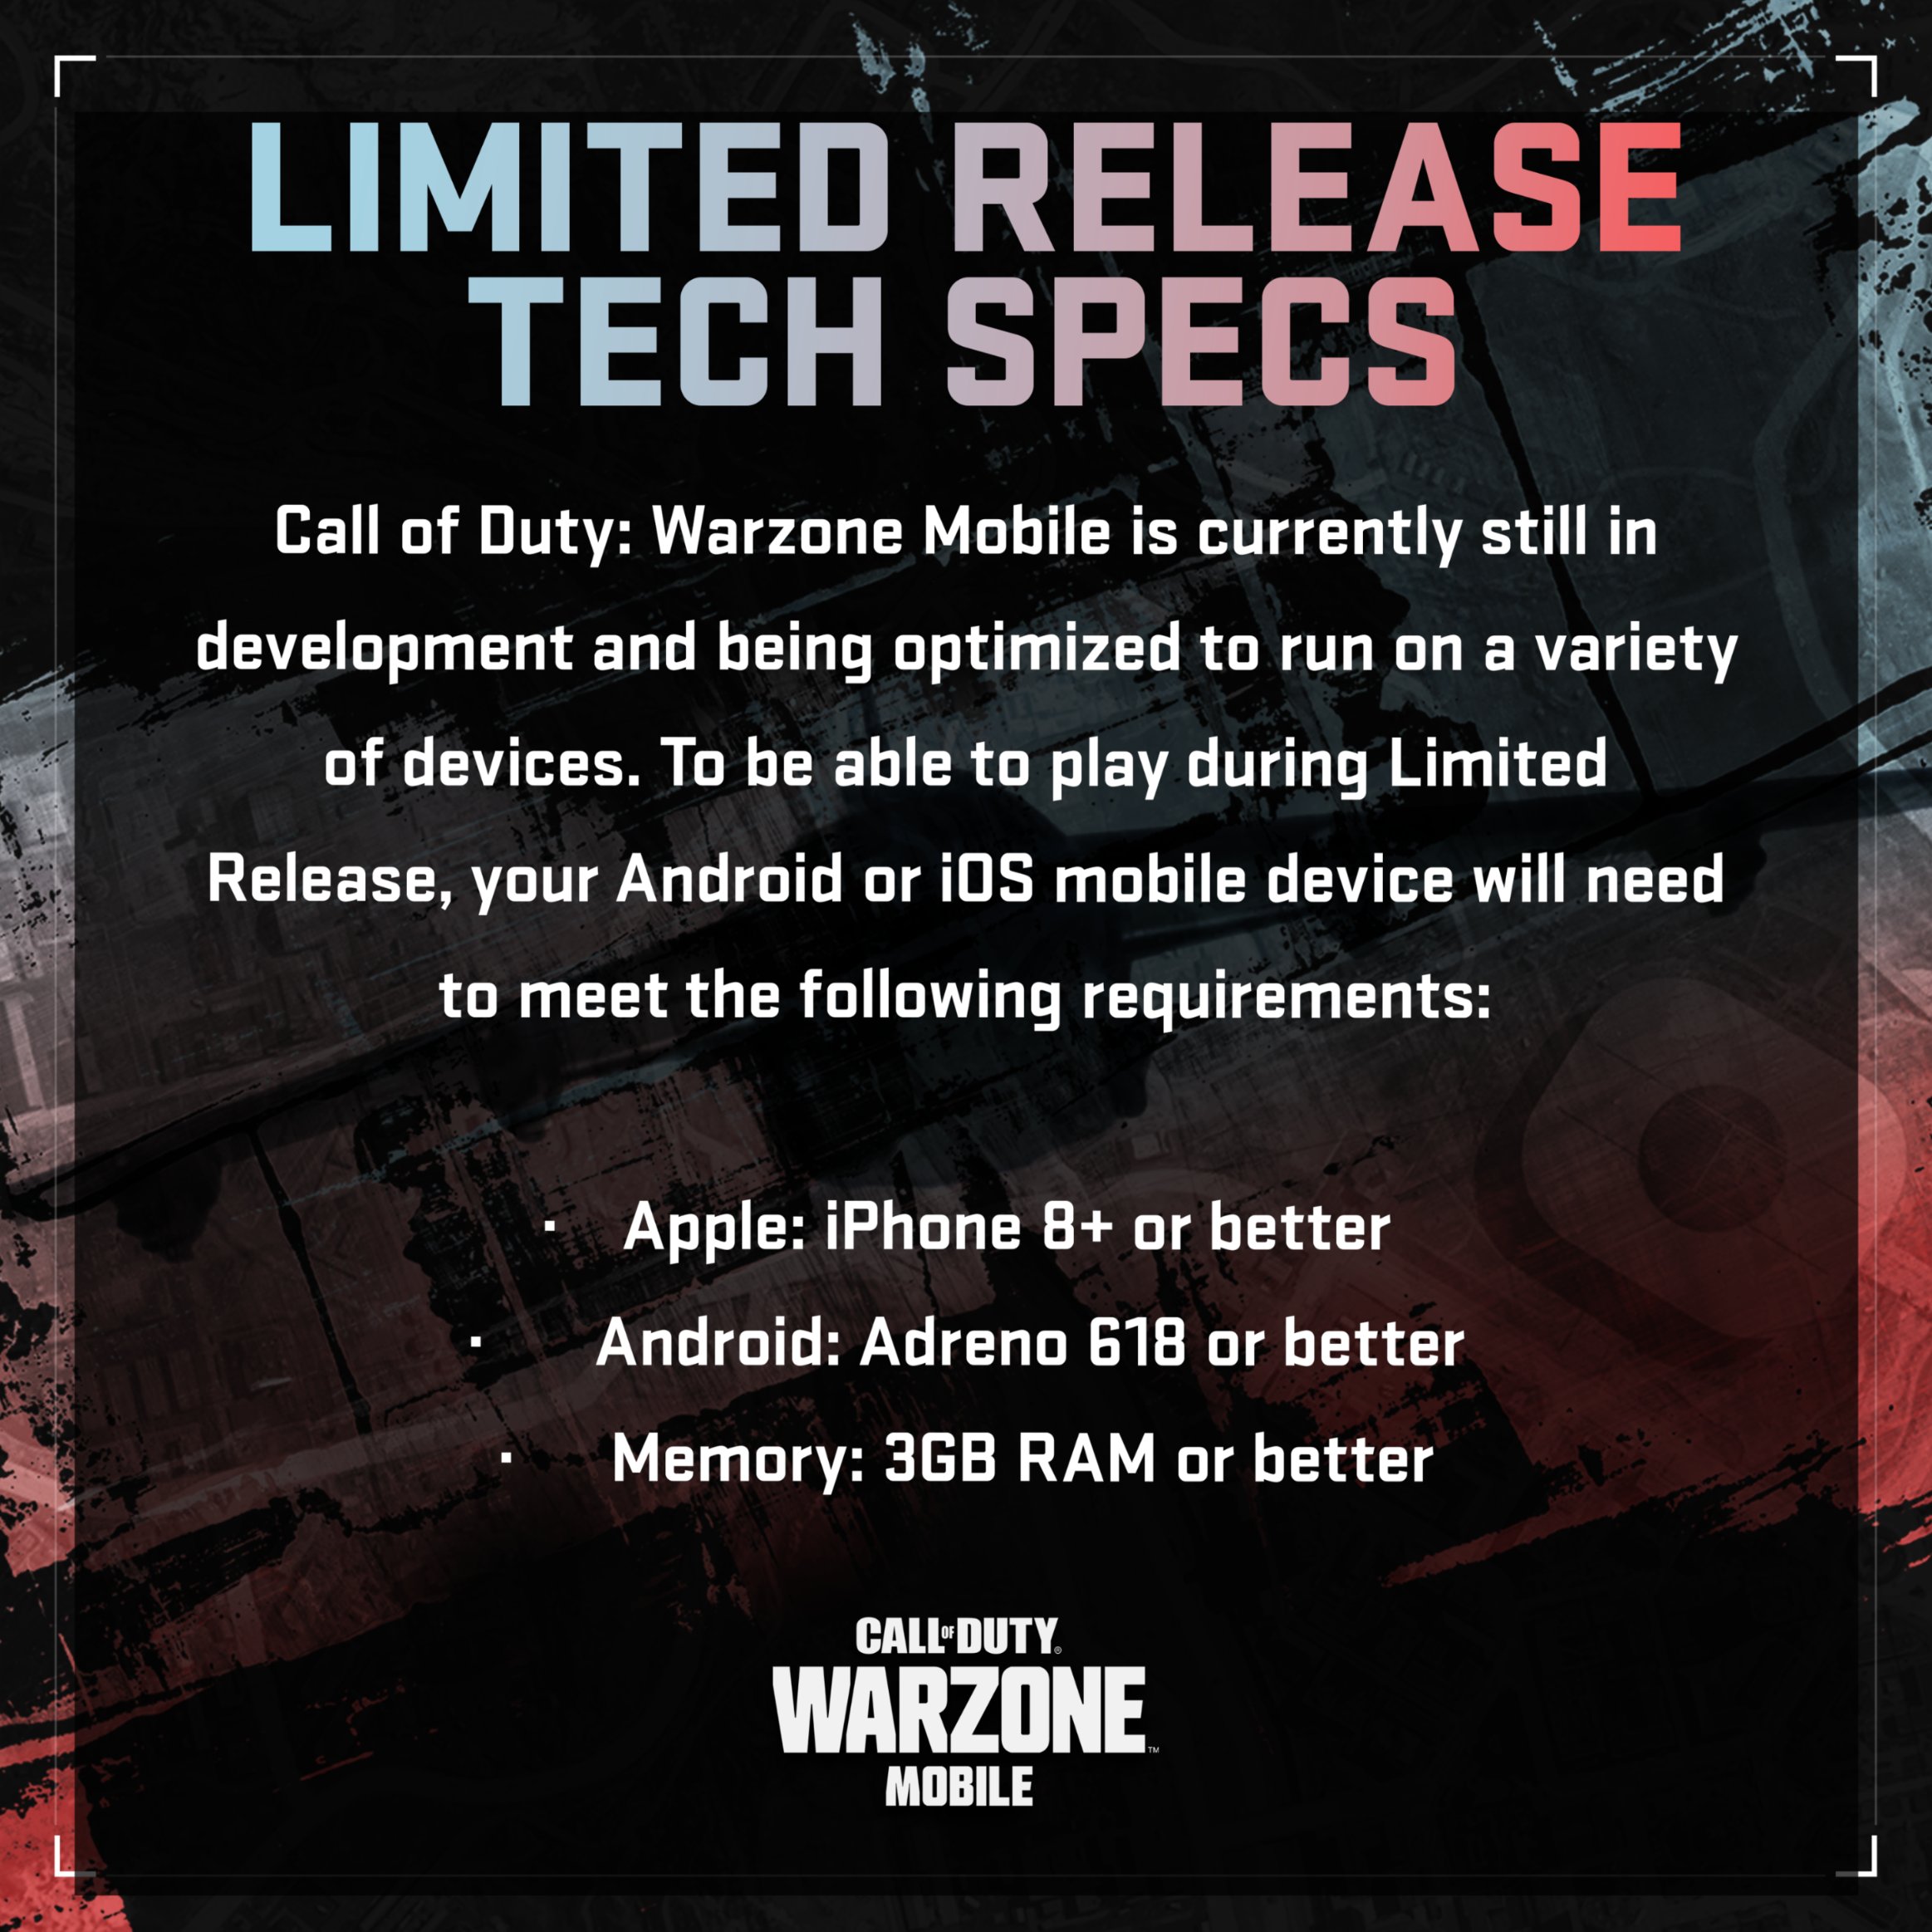 Call of Duty®: Warzone™ Mobile Limited Release FAQ